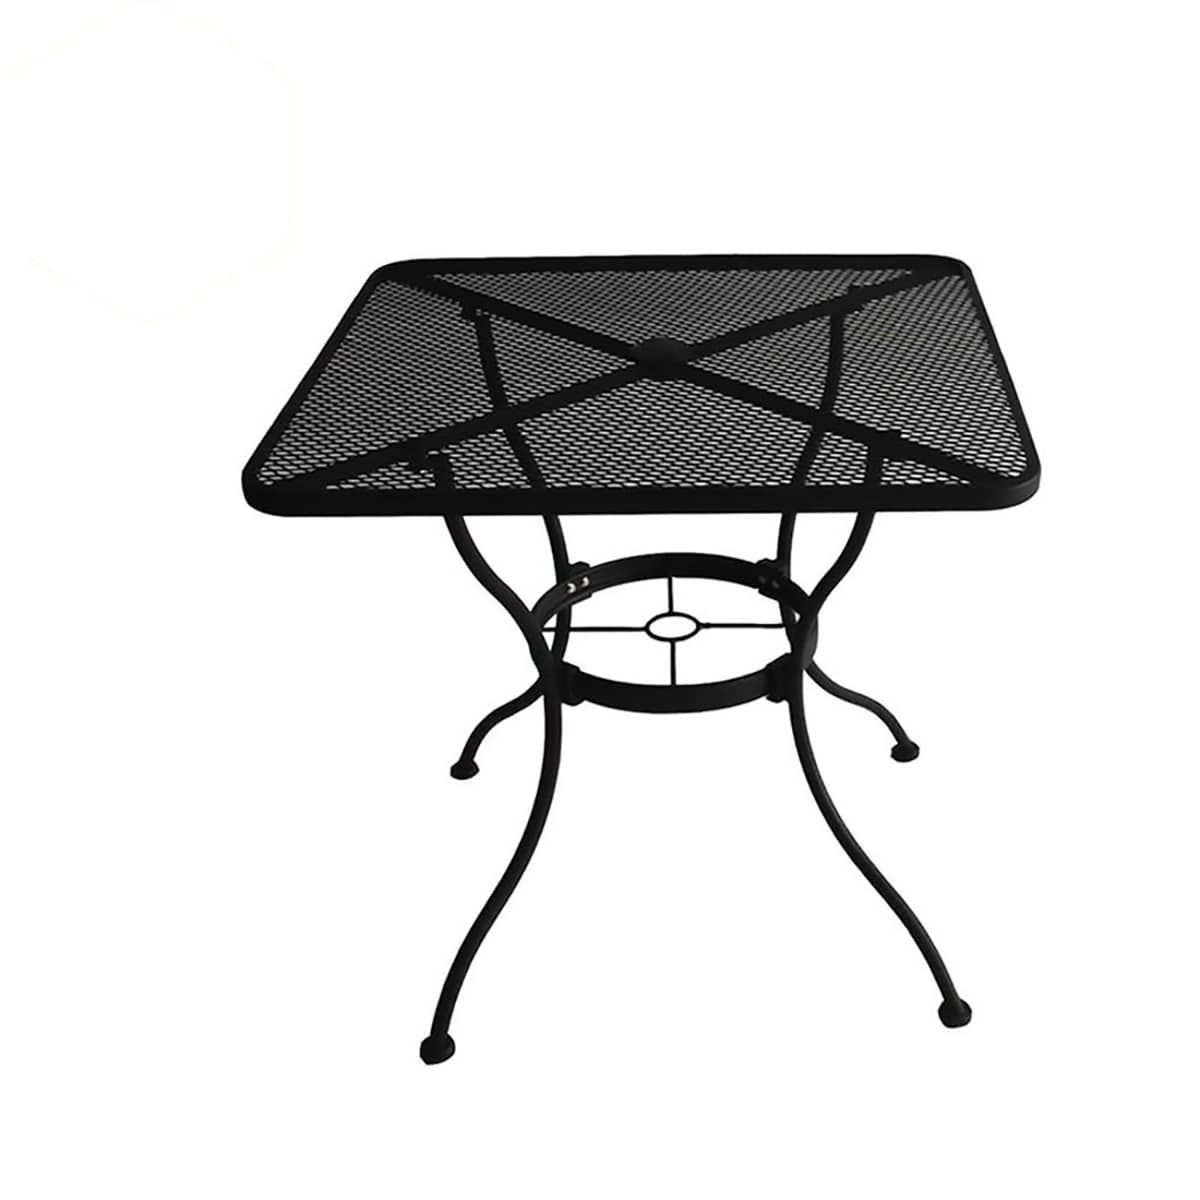 Garden Treasures Davenport Square Outdoor Dining Table 30 In W X 30 In L  Umbrella Hole In The Patio Tables Department At Lowes Throughout Trendy Black Square Outdoor Tables (View 15 of 15)